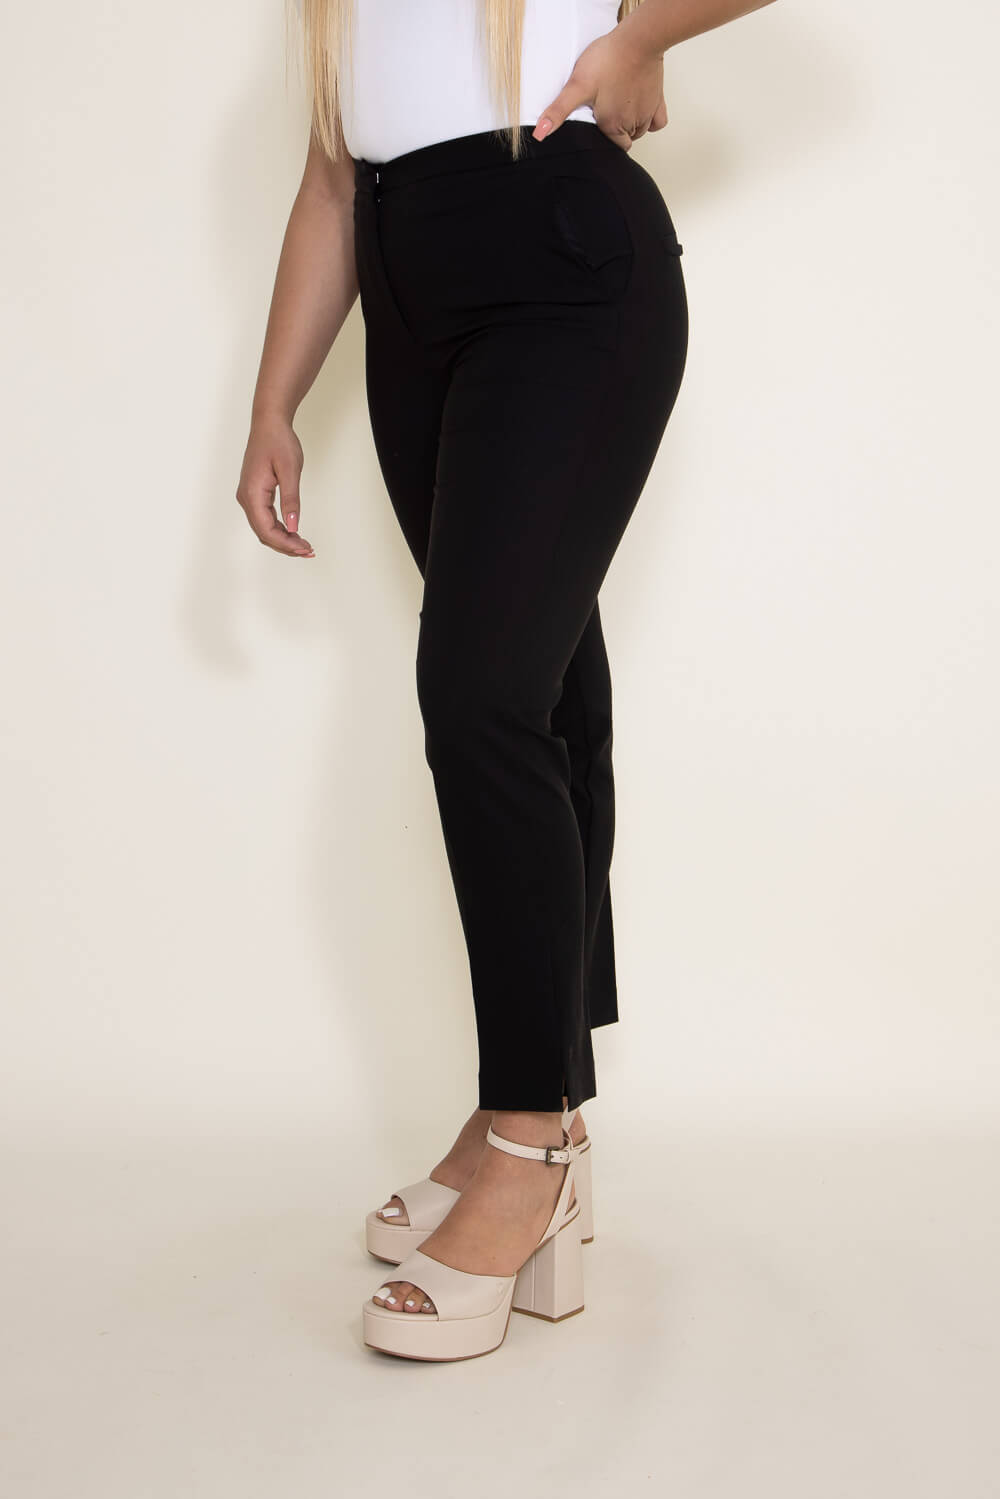 Shop Stretch High-Rise Skinny Pants from The Reset | Buy Now!